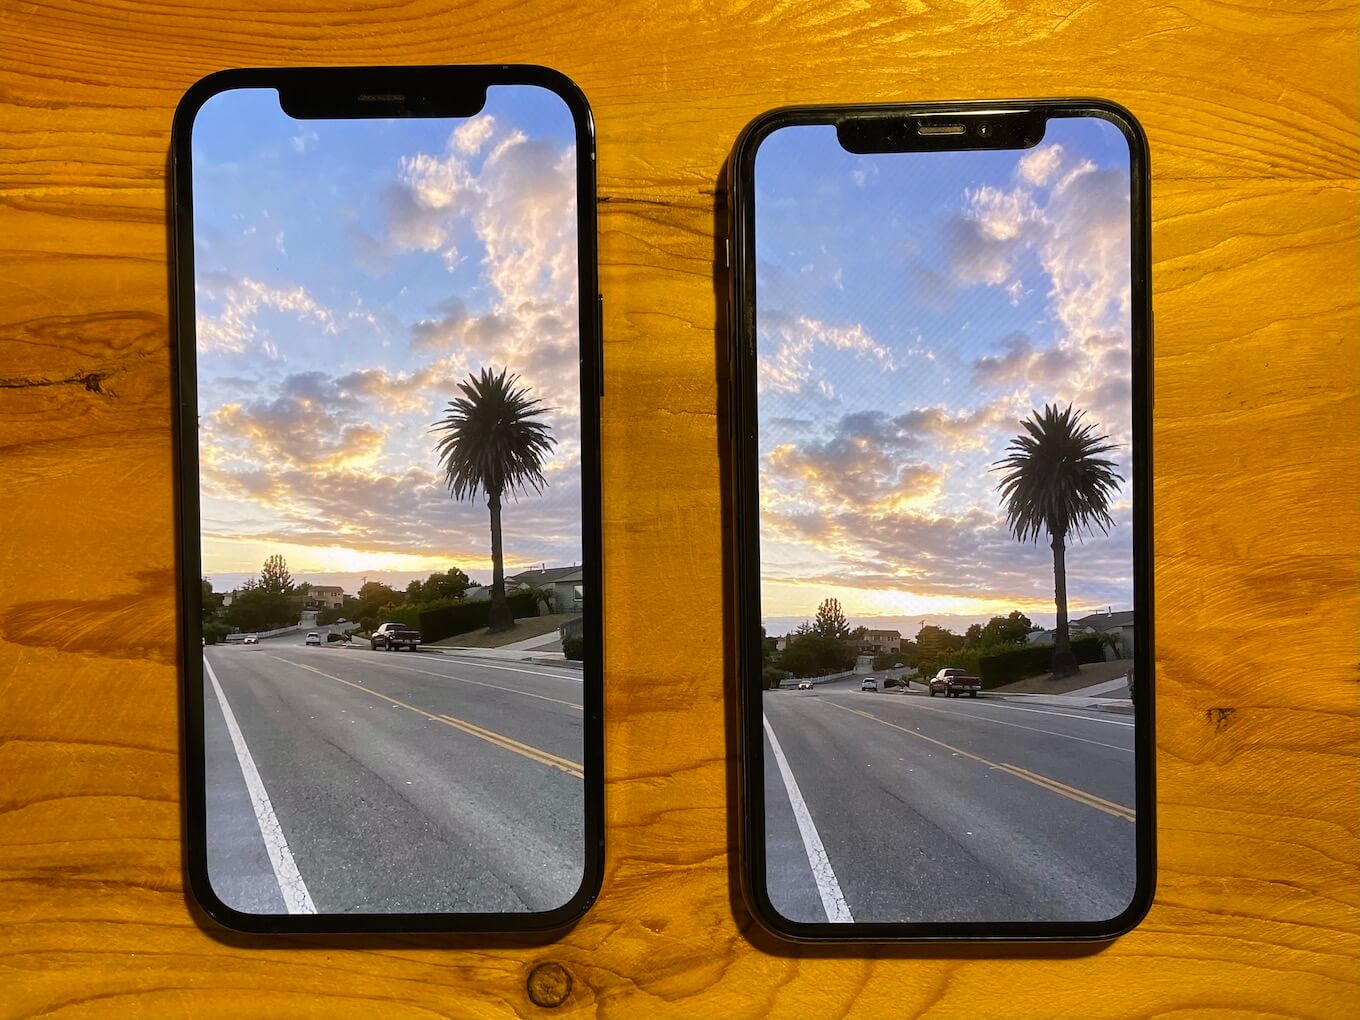 iPhone 12 Pro next to iPhone 11 Pro